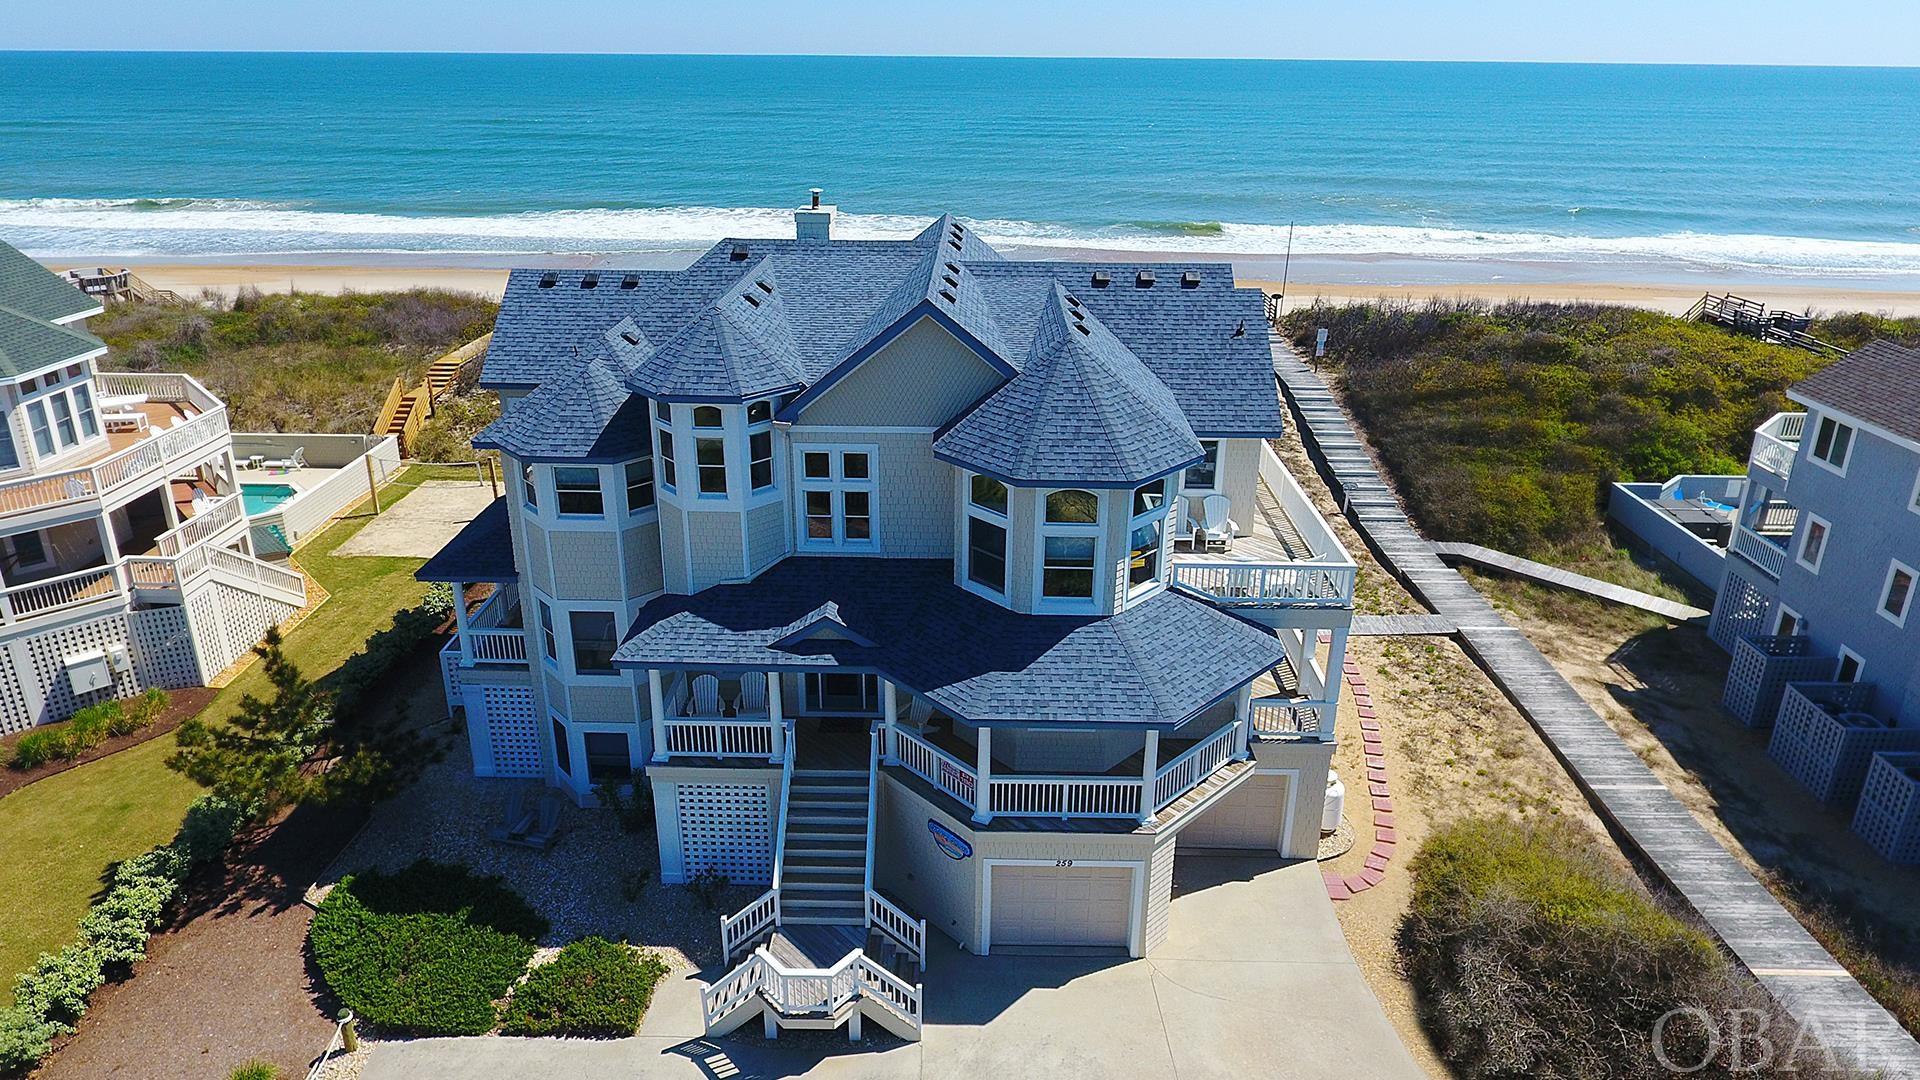 WOW : $180,000 PRICE REDUCTION !! MOTIVATED SELLER.  High-end, well-maintained Oceanfront Home.  Oversized rooms and living area.  Originally built for second home luxury.  Elevated, preferred X Flood Zone location.  100 feet of private dune frontage with unobstructed panoramic ocean views. Private ocean beach access walkway.  7 bedrooms/8.5 baths. 9 Ft ceilings.  2 car garage for easy dry entry and storage.  2 en suite bedrooms ( with water closet) on the ground floor with easy access to recreation room and pool area.  Separate full bath for pool entry/exit.  Mid-level has 4 bedrooms (3 with water closet) and a sizeable den/entertainment location. Large laundry room with double washer & dryer, additional shelving/storage.  Covered deck access for all.  The top floor has a spacious living area with flow through dining room/adjoining deck with exquisite views of the Currituck Sound.  An open gourmet kitchen with gas cook top and convenient double appliances.  Easy access to sun decks that look out at breathtaking views of the Atlantic sunrise and Currituck sound sunset.  A stone surround gas fireplace will keep you cozy in the cooler winter months.  In addition, there is a peaceful ships watch nook for more privacy.  A large en suite bedroom (separate water closet ) with its own private oceanside deck for personal solitude.  Separate office/sitting area close by.  Comfortable passage to all 3 levels with interior elevator for safety and comfort.